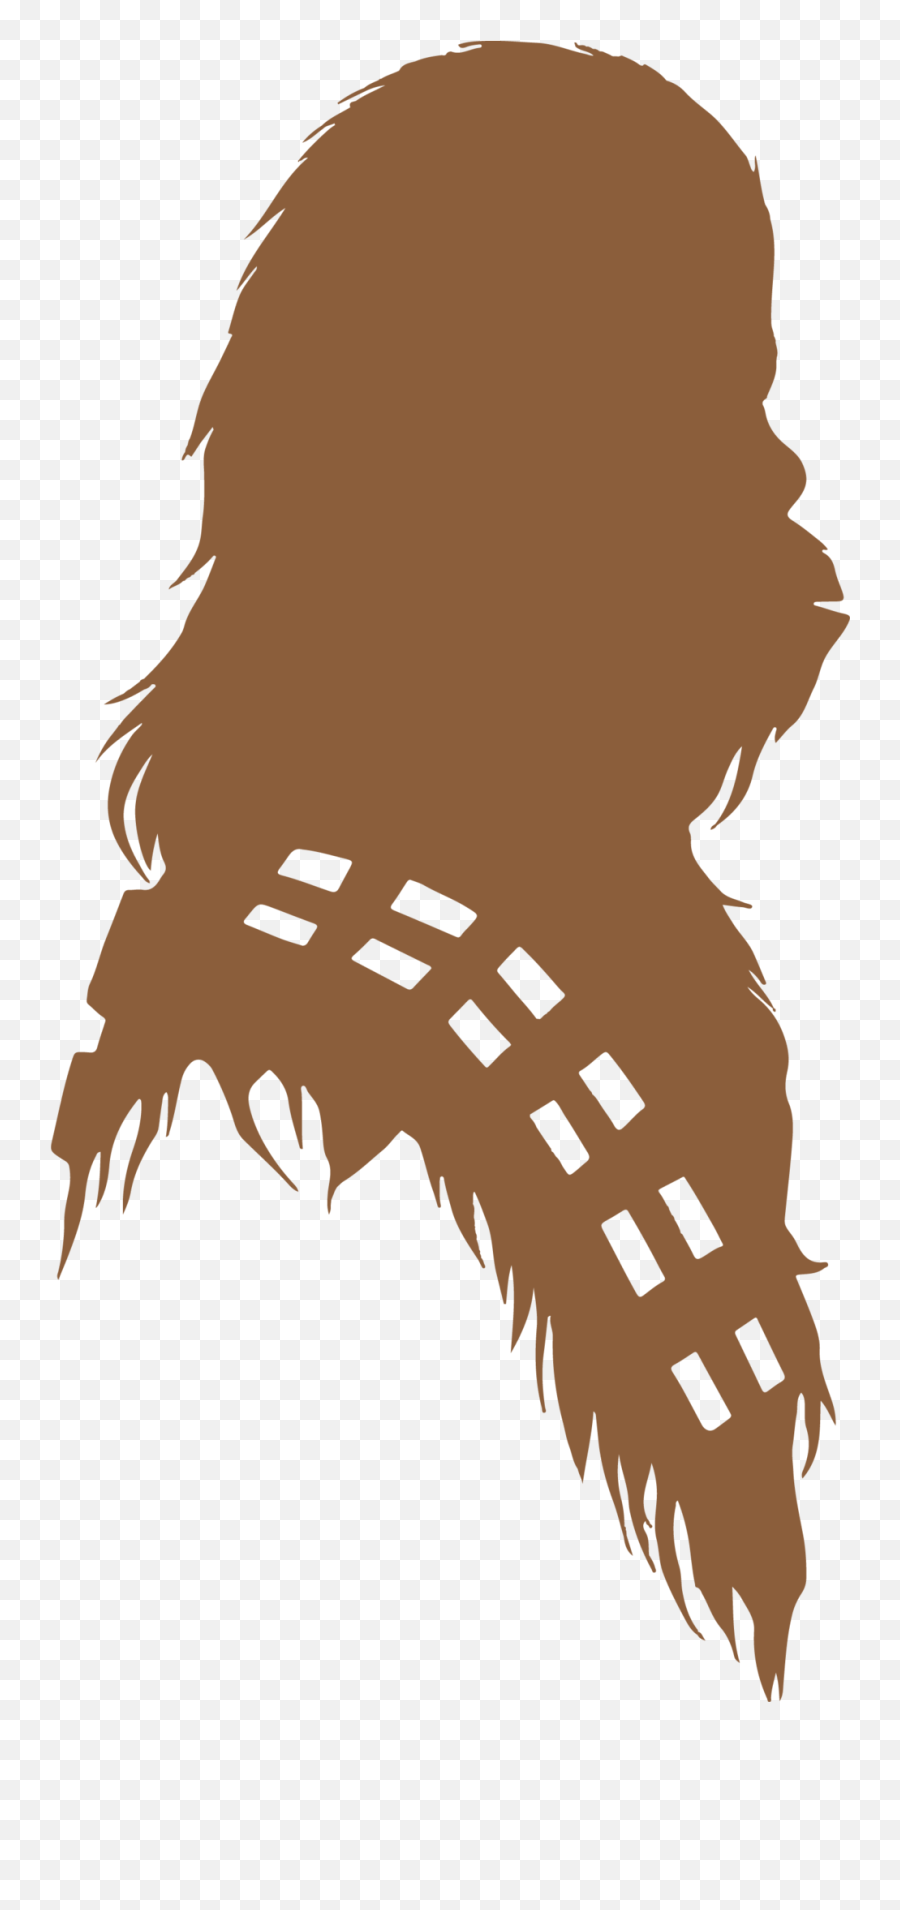 Chewbacca Silhouette Star Wars Svg Dxf Eps Png Cut File Cricut And Machines - Star Wars Chewbacca Silhouette,Cut Png